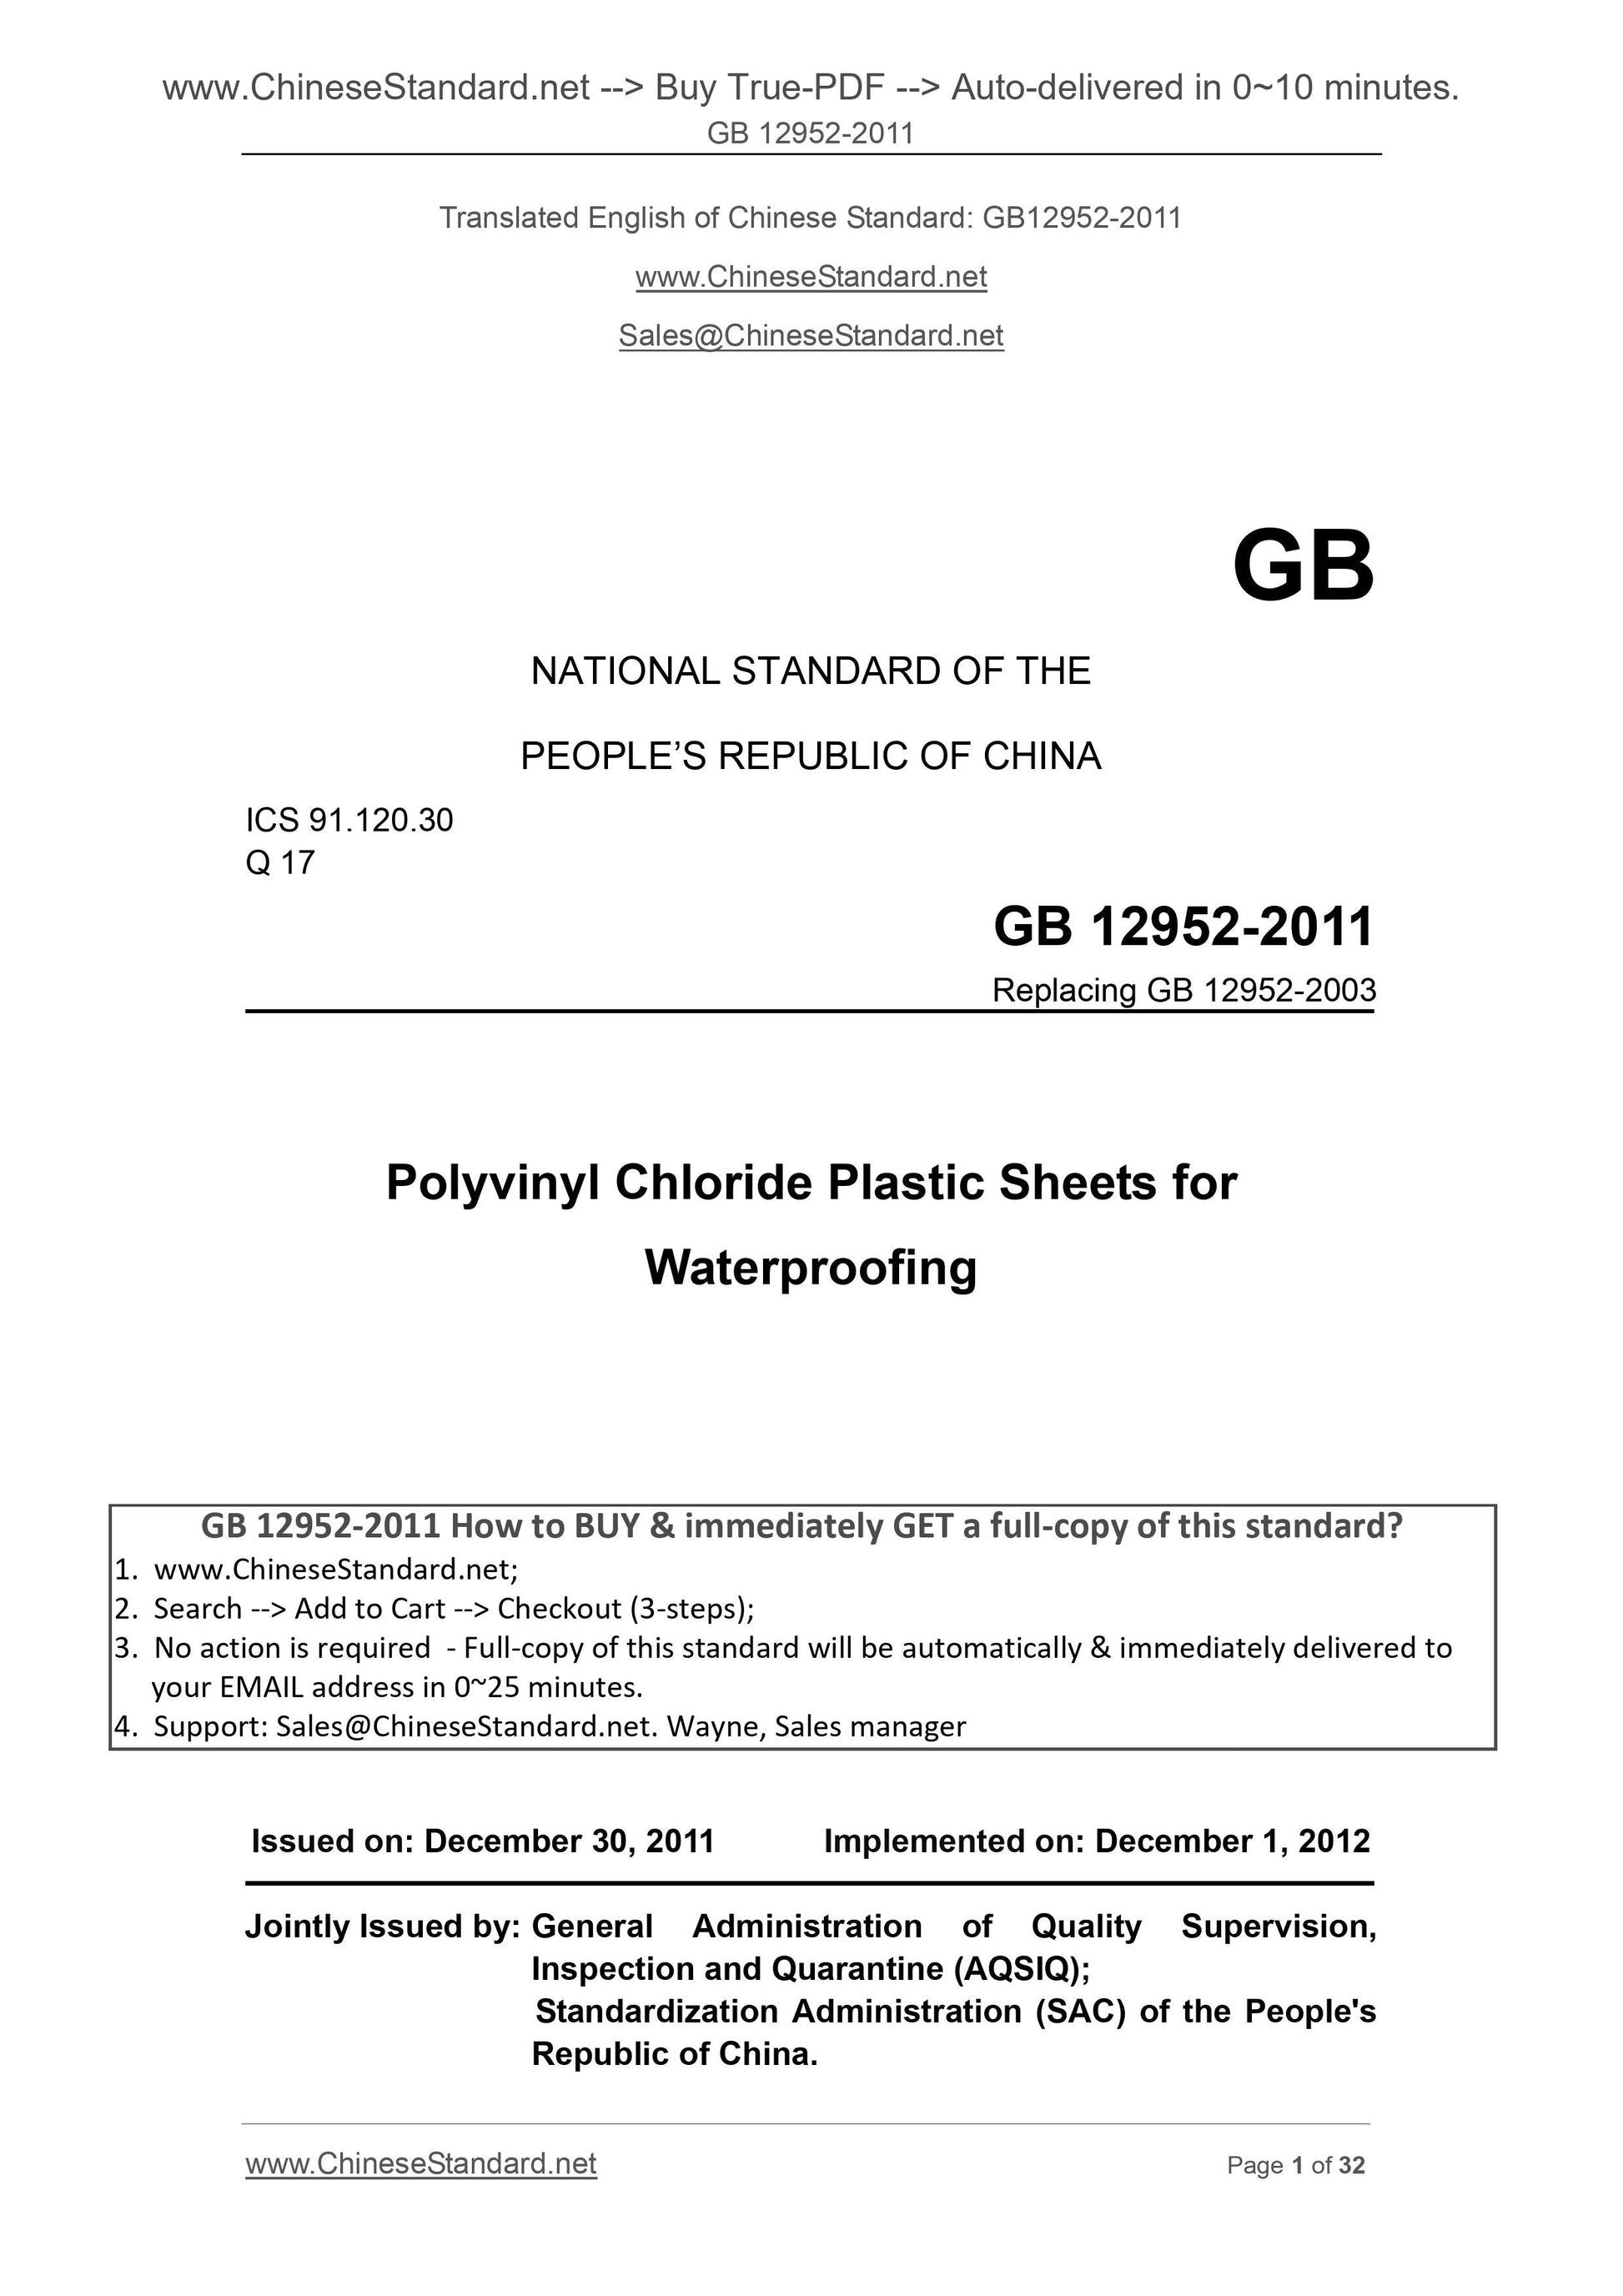 GB 12952-2011 Page 1